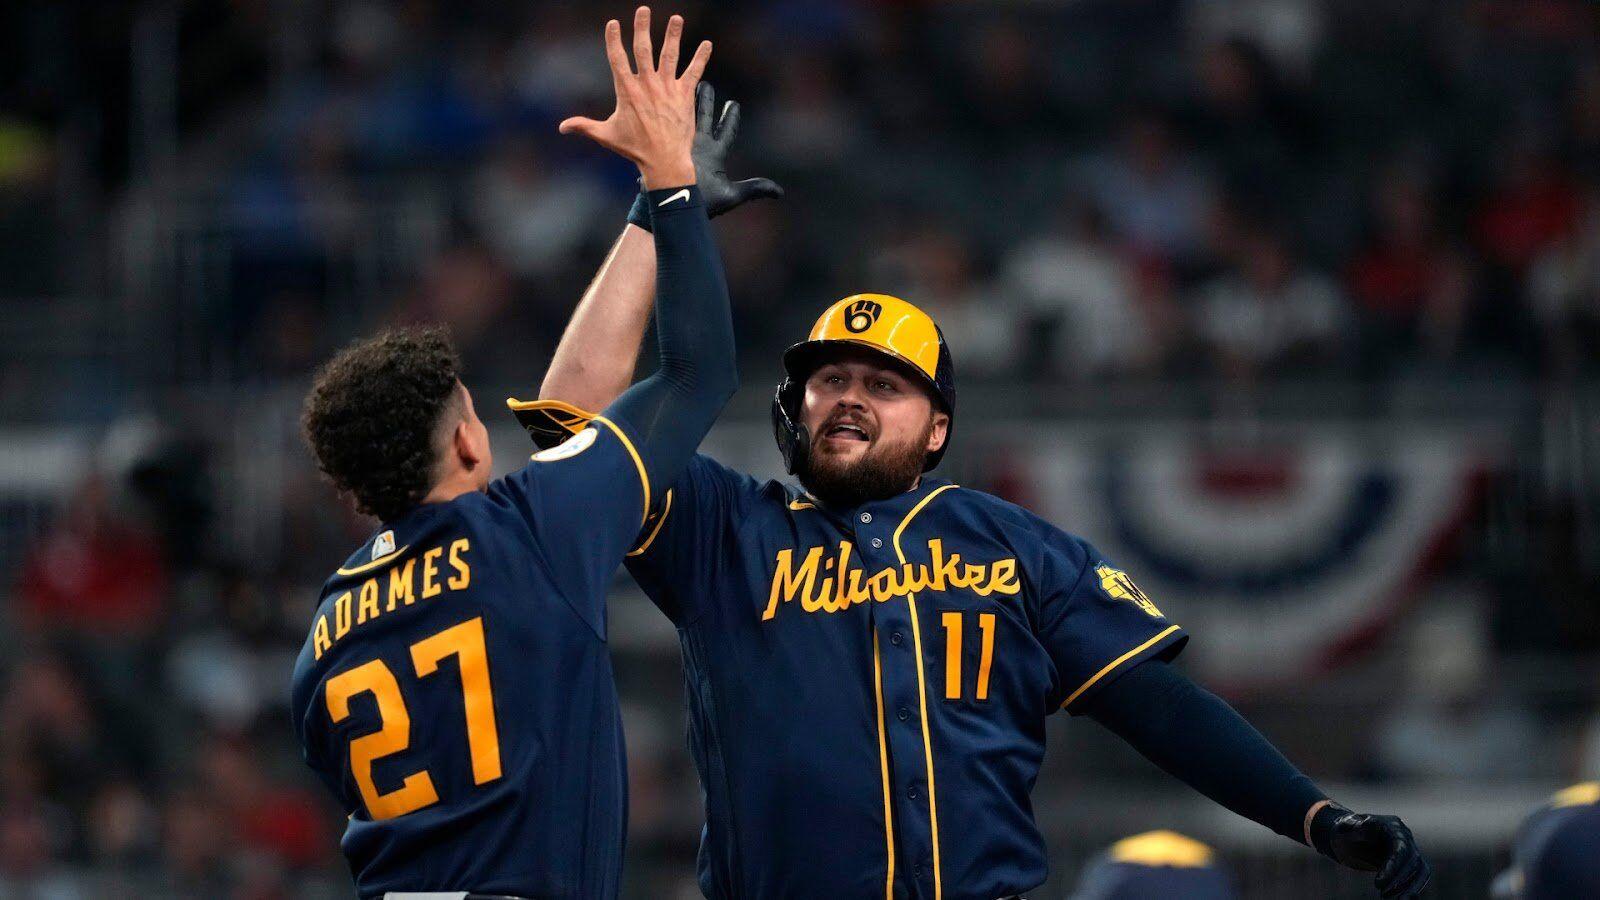 Brewers take no-hitter into 11th inning but lose to Yankees - Brew